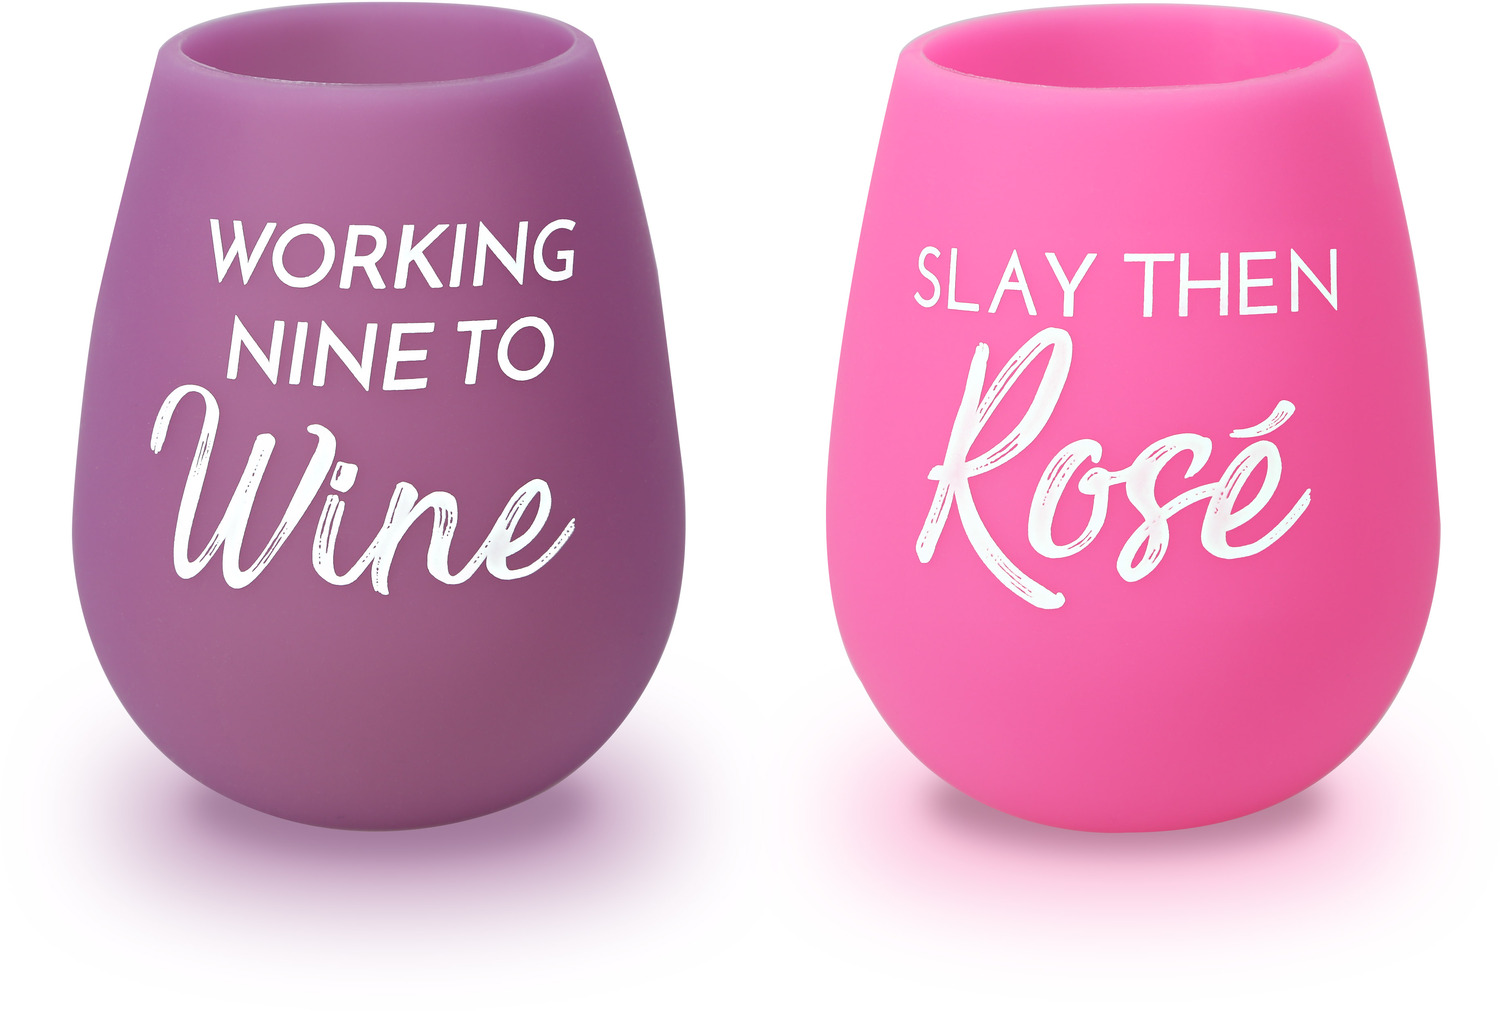 Slay then Rosé by My Kinda Girl - Slay then Rosé - 13 oz Silicone Wine Glasses
(Set of 2)